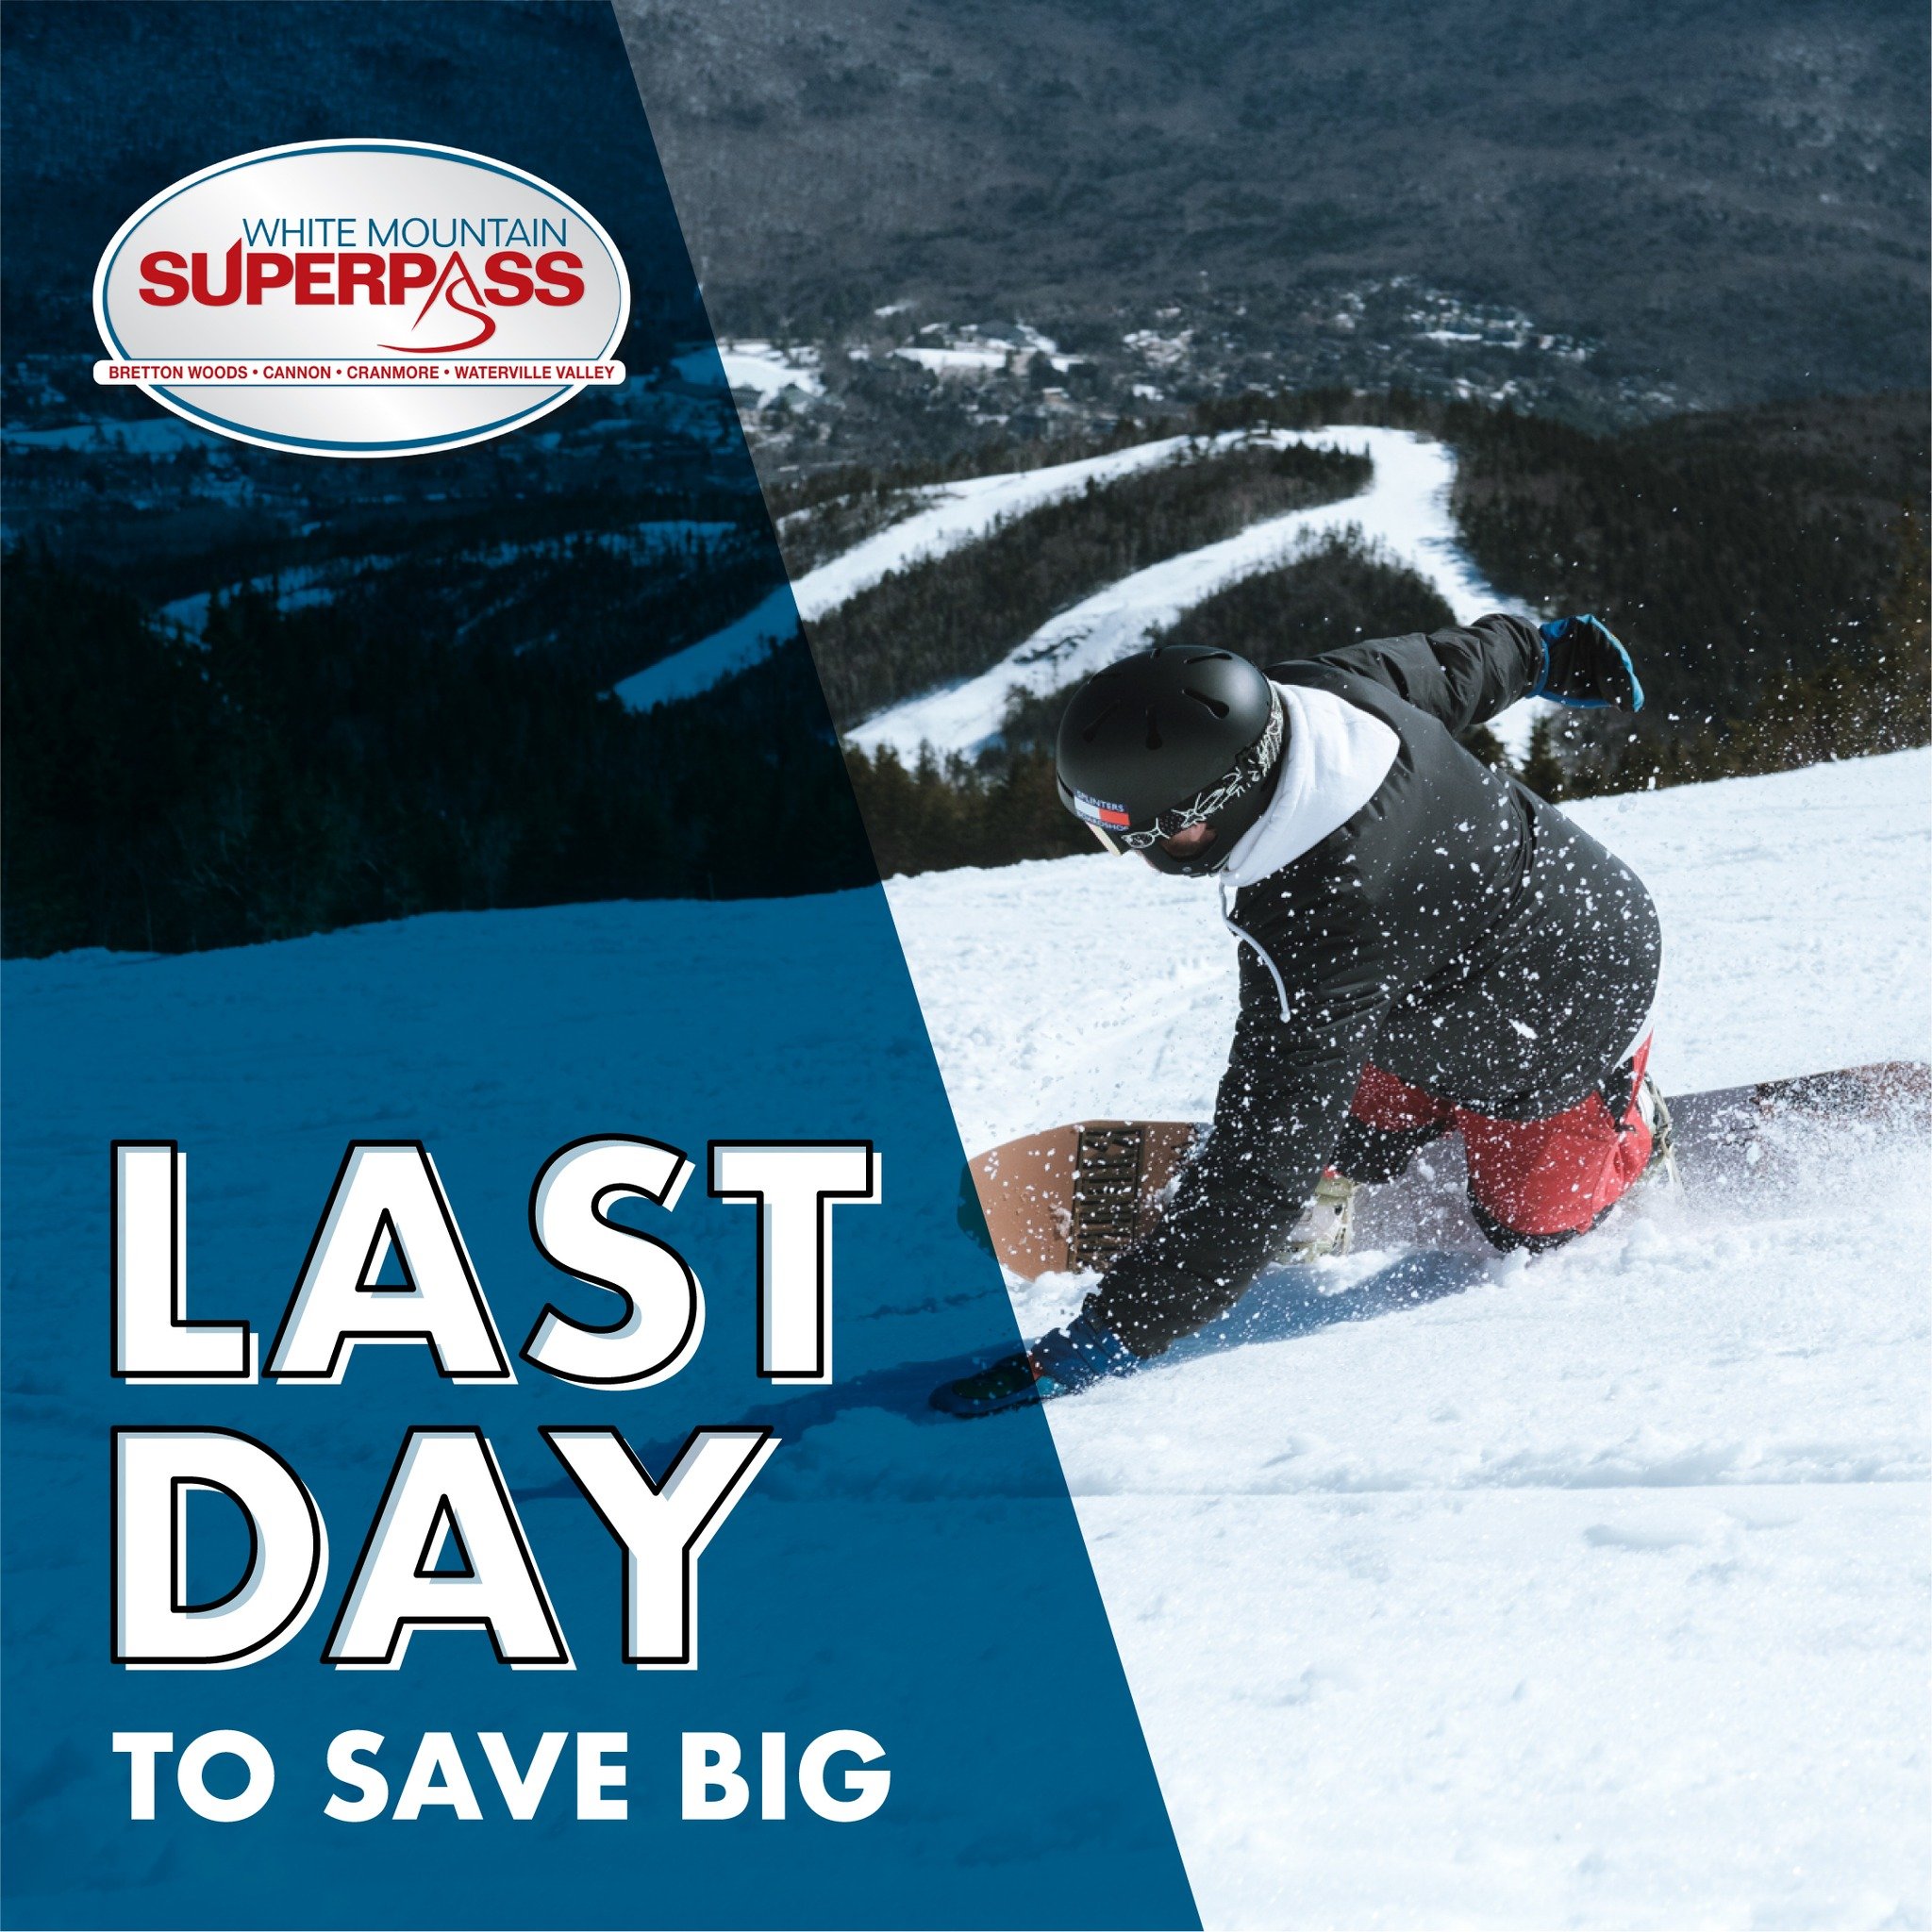 Less than 24 hours remain to buy your White Mountain Superpass for the 2024/25 season at its lowest rate! Ski at Waterville Valley, Bretton Woods, Cannon and Cranmore all under the same pass!

🔗 in bio for more info and to buy now!